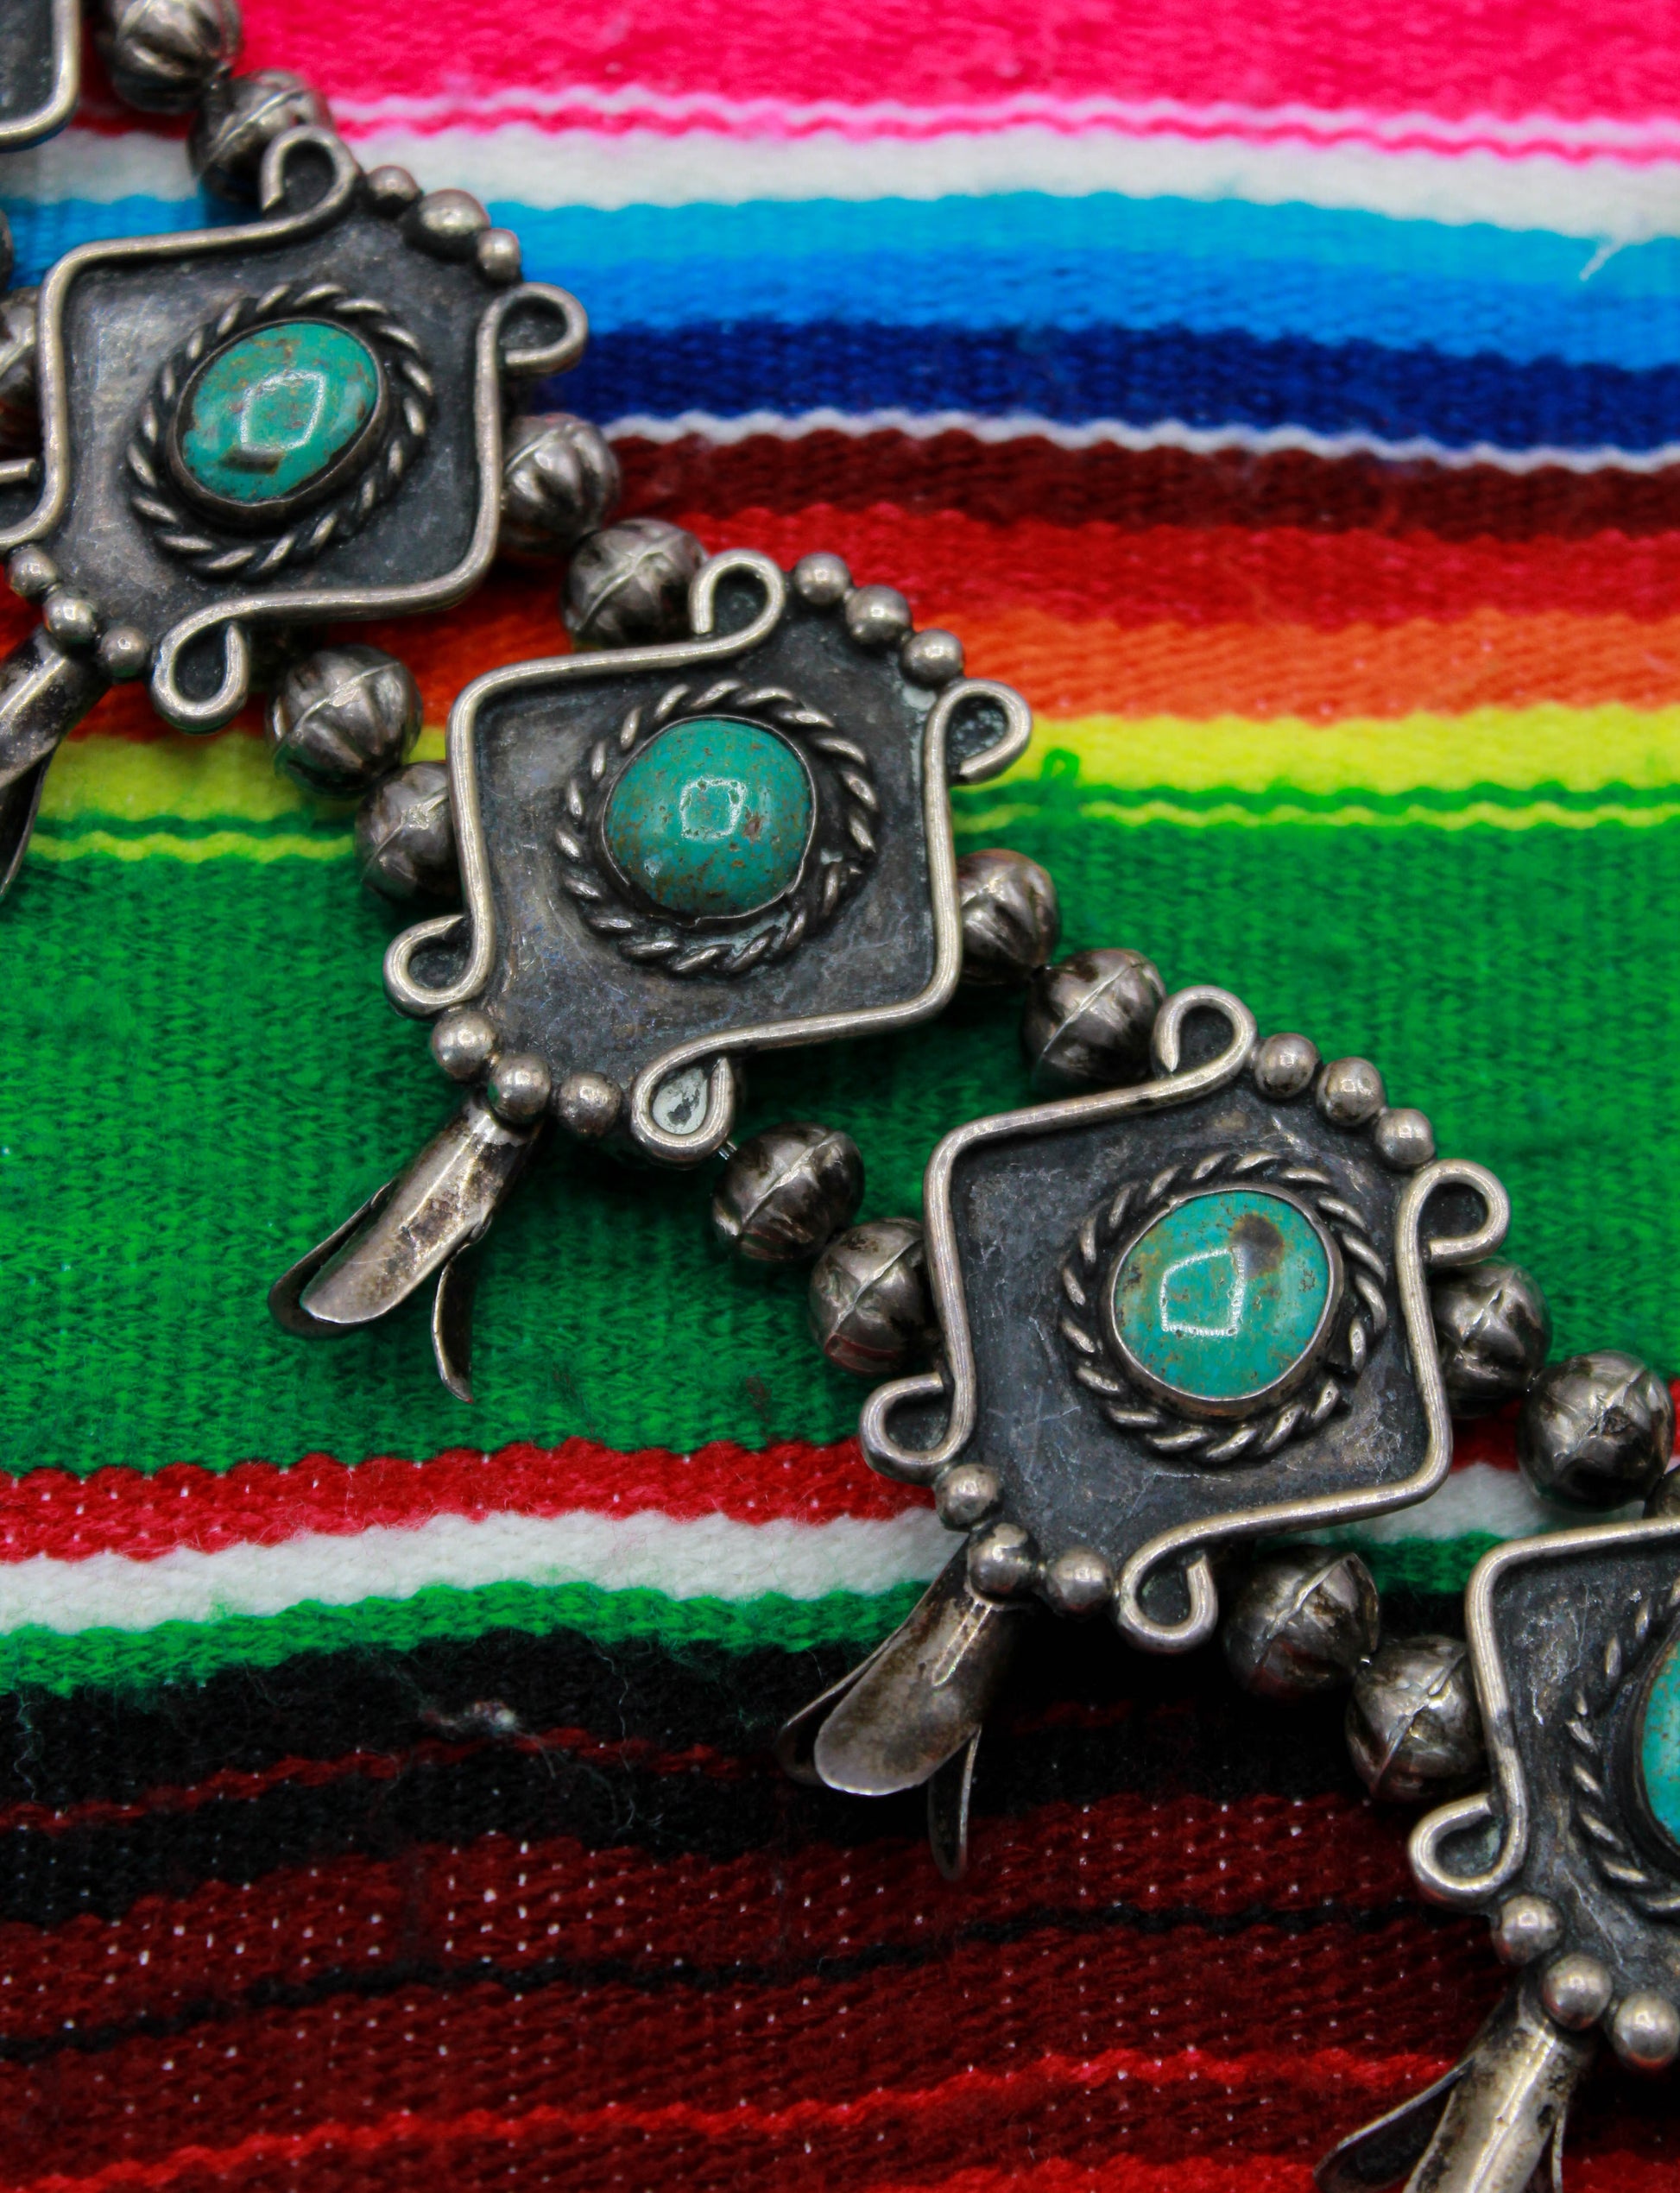 Vintage 40's Navajo Squash Blossom Necklace King's Manassa Turquoise Sterling Silver